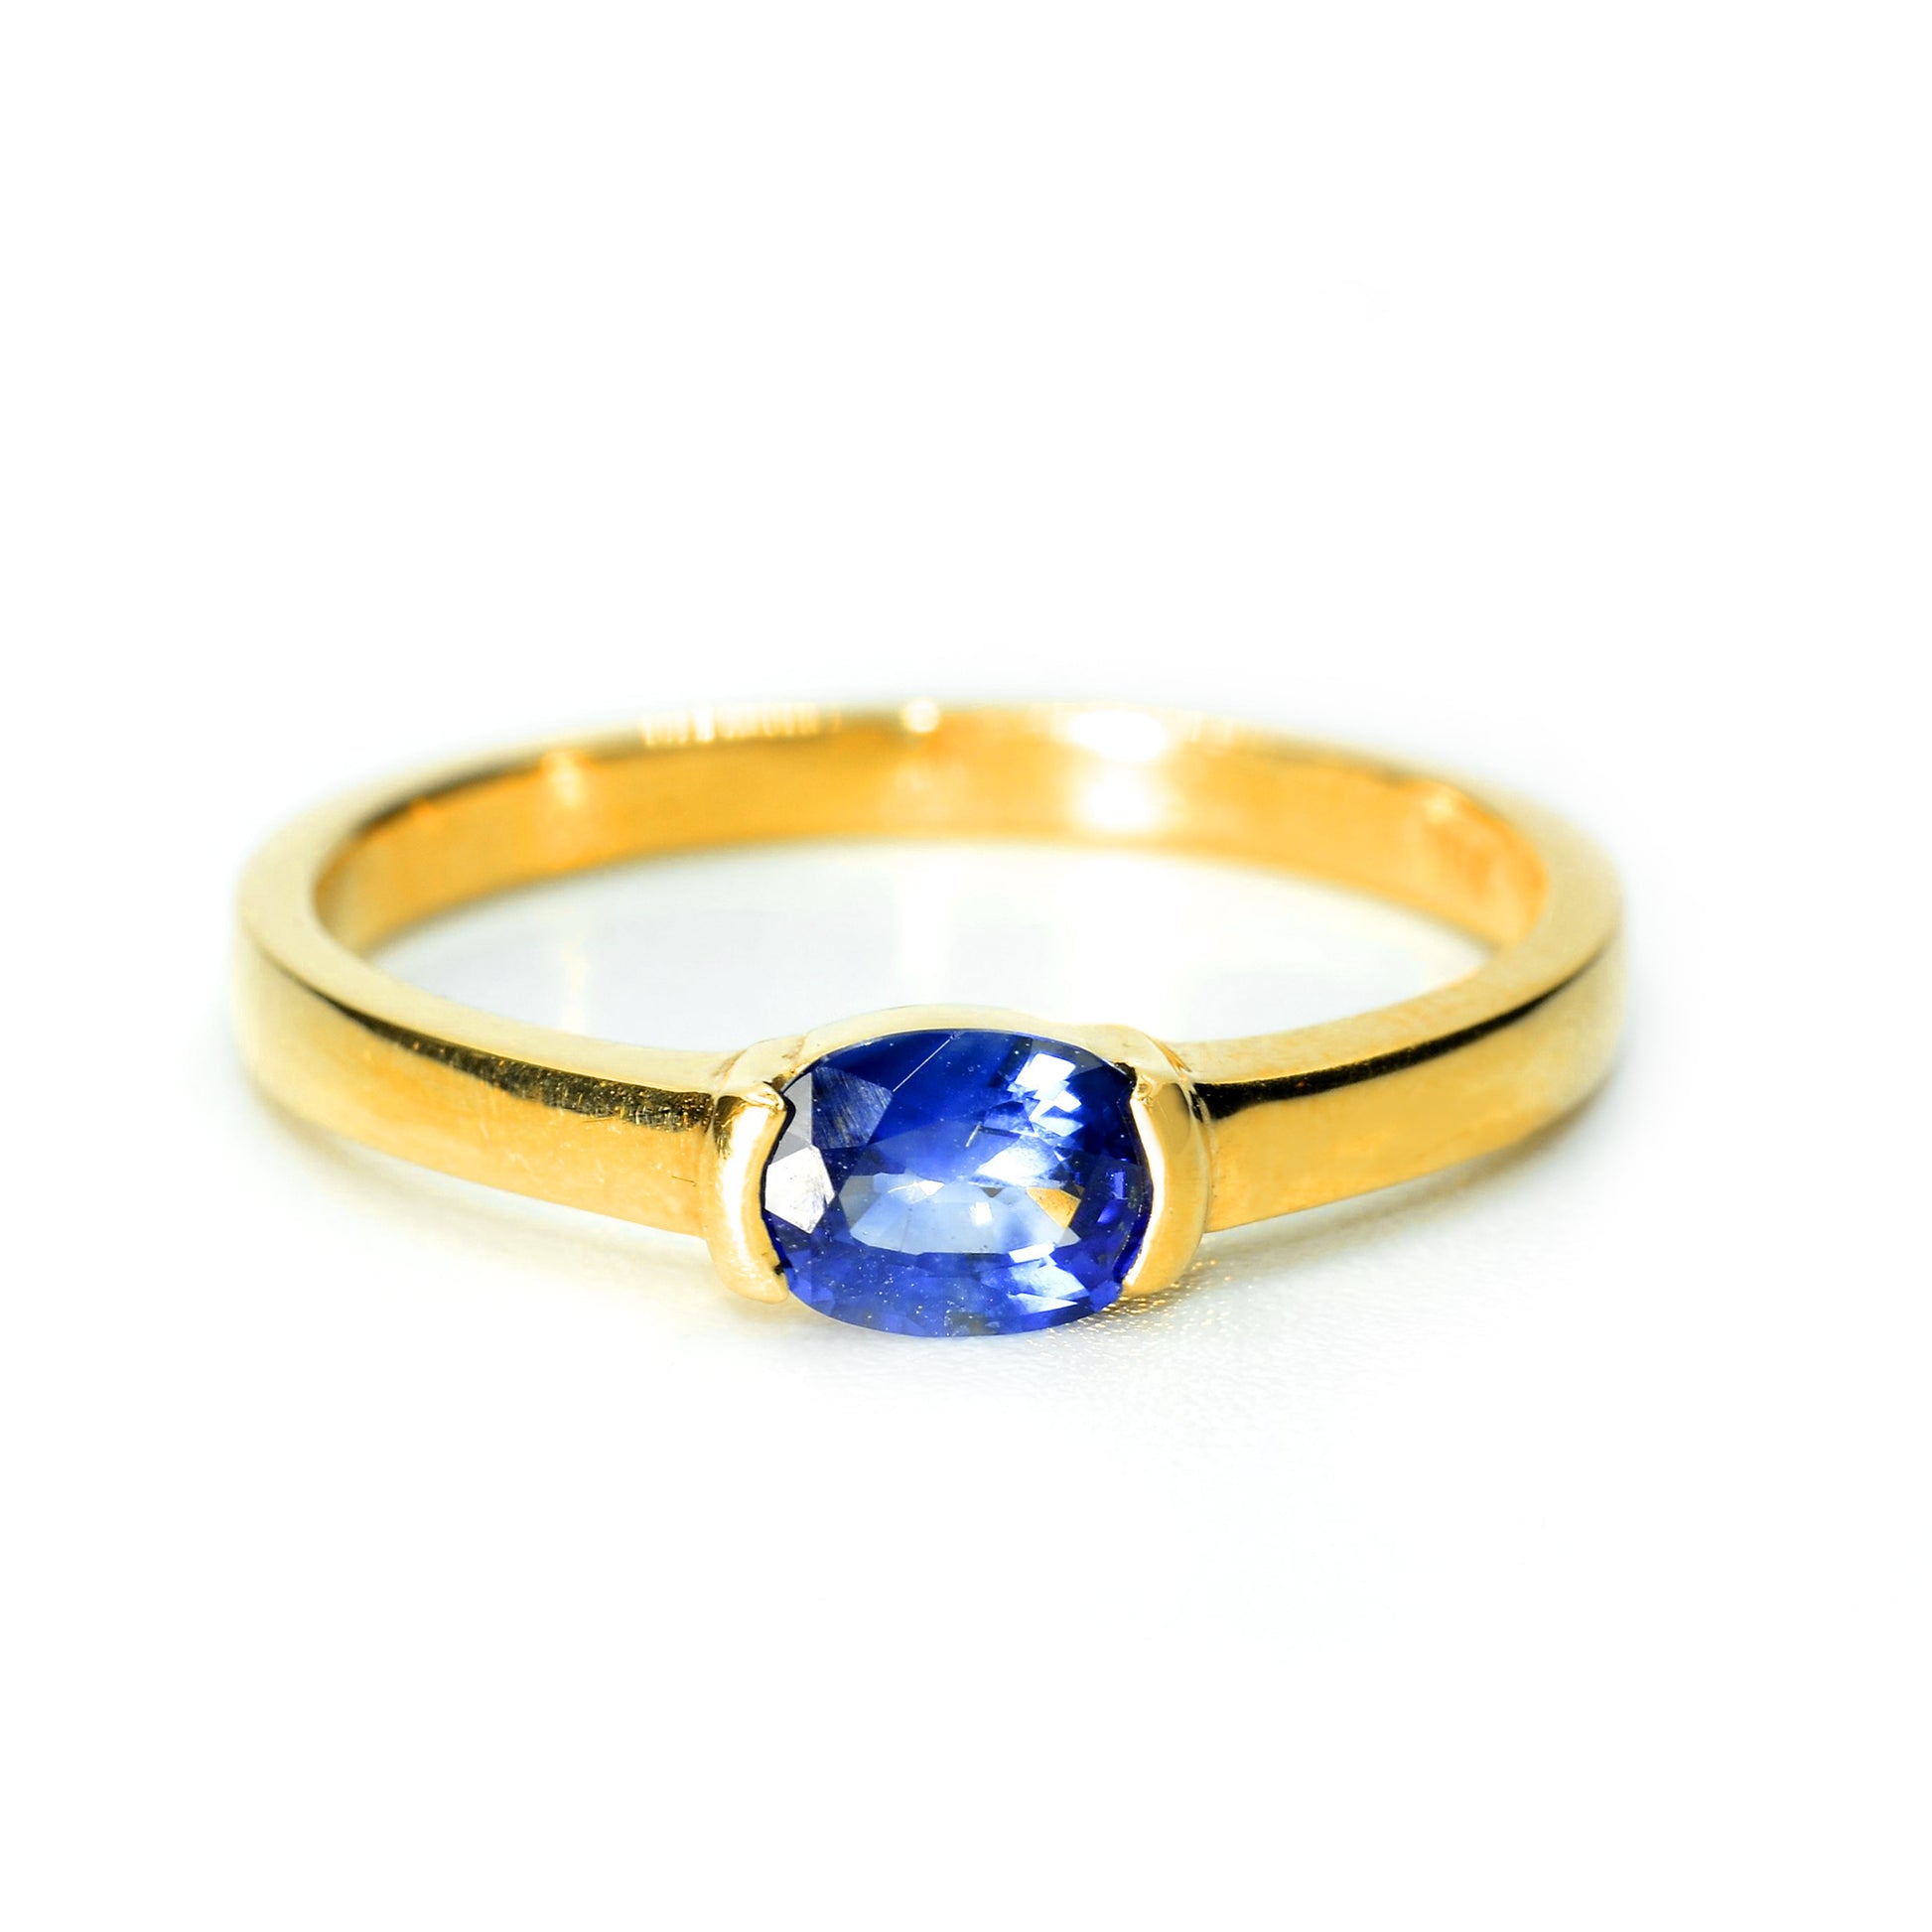 Front view of Half bezel blue sapphire ring in 18K yellow gold setting. Handmade by Shiraz Jewelry in Chiang Mai